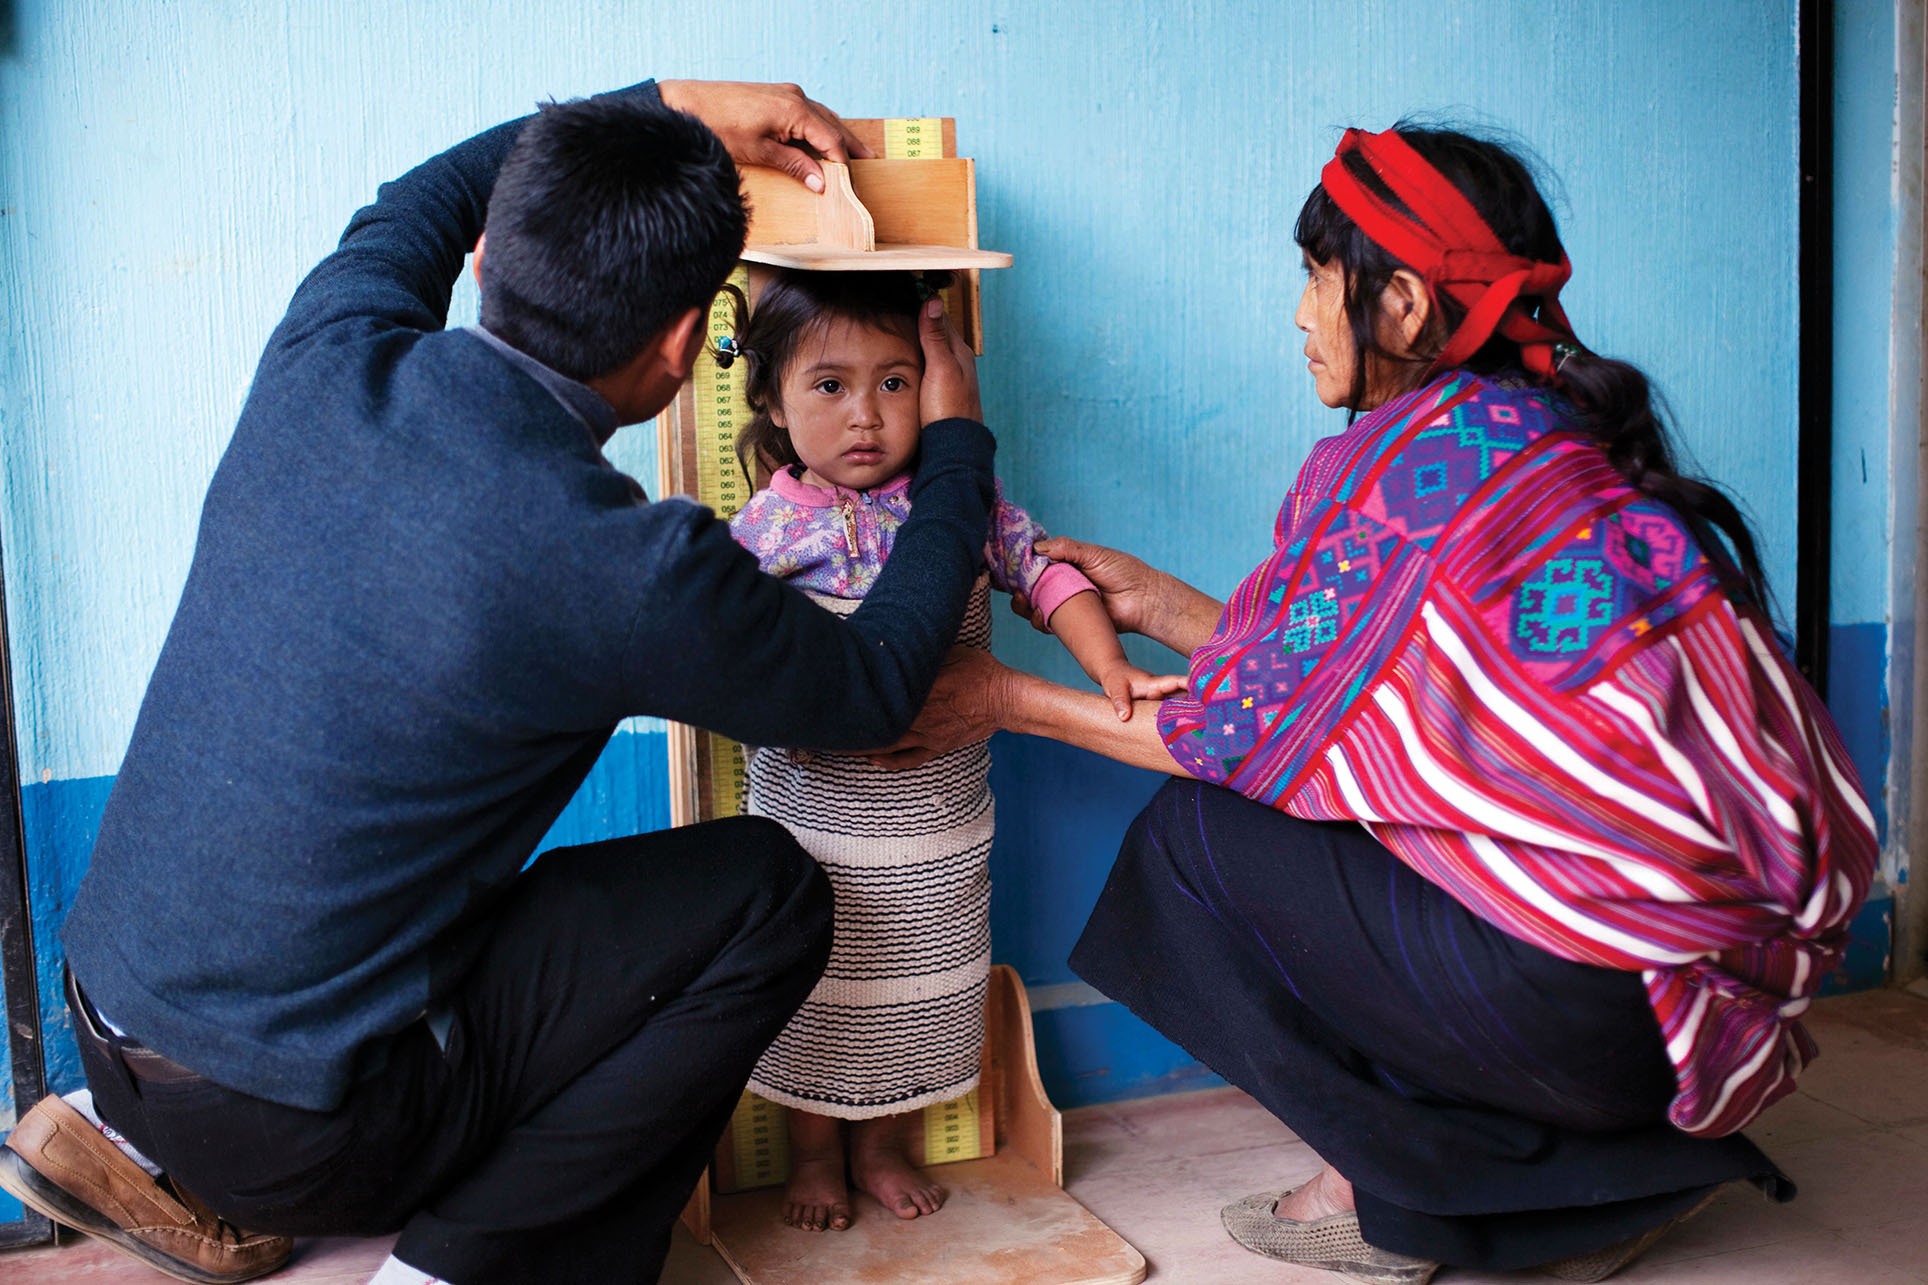 A three-year-old Guatemalan girl's height and weight are measured as part of a nationwide campaign against malnutrition known as “Zero Hunger.” (Photo by Rodrigo Abd/Associated Press.)